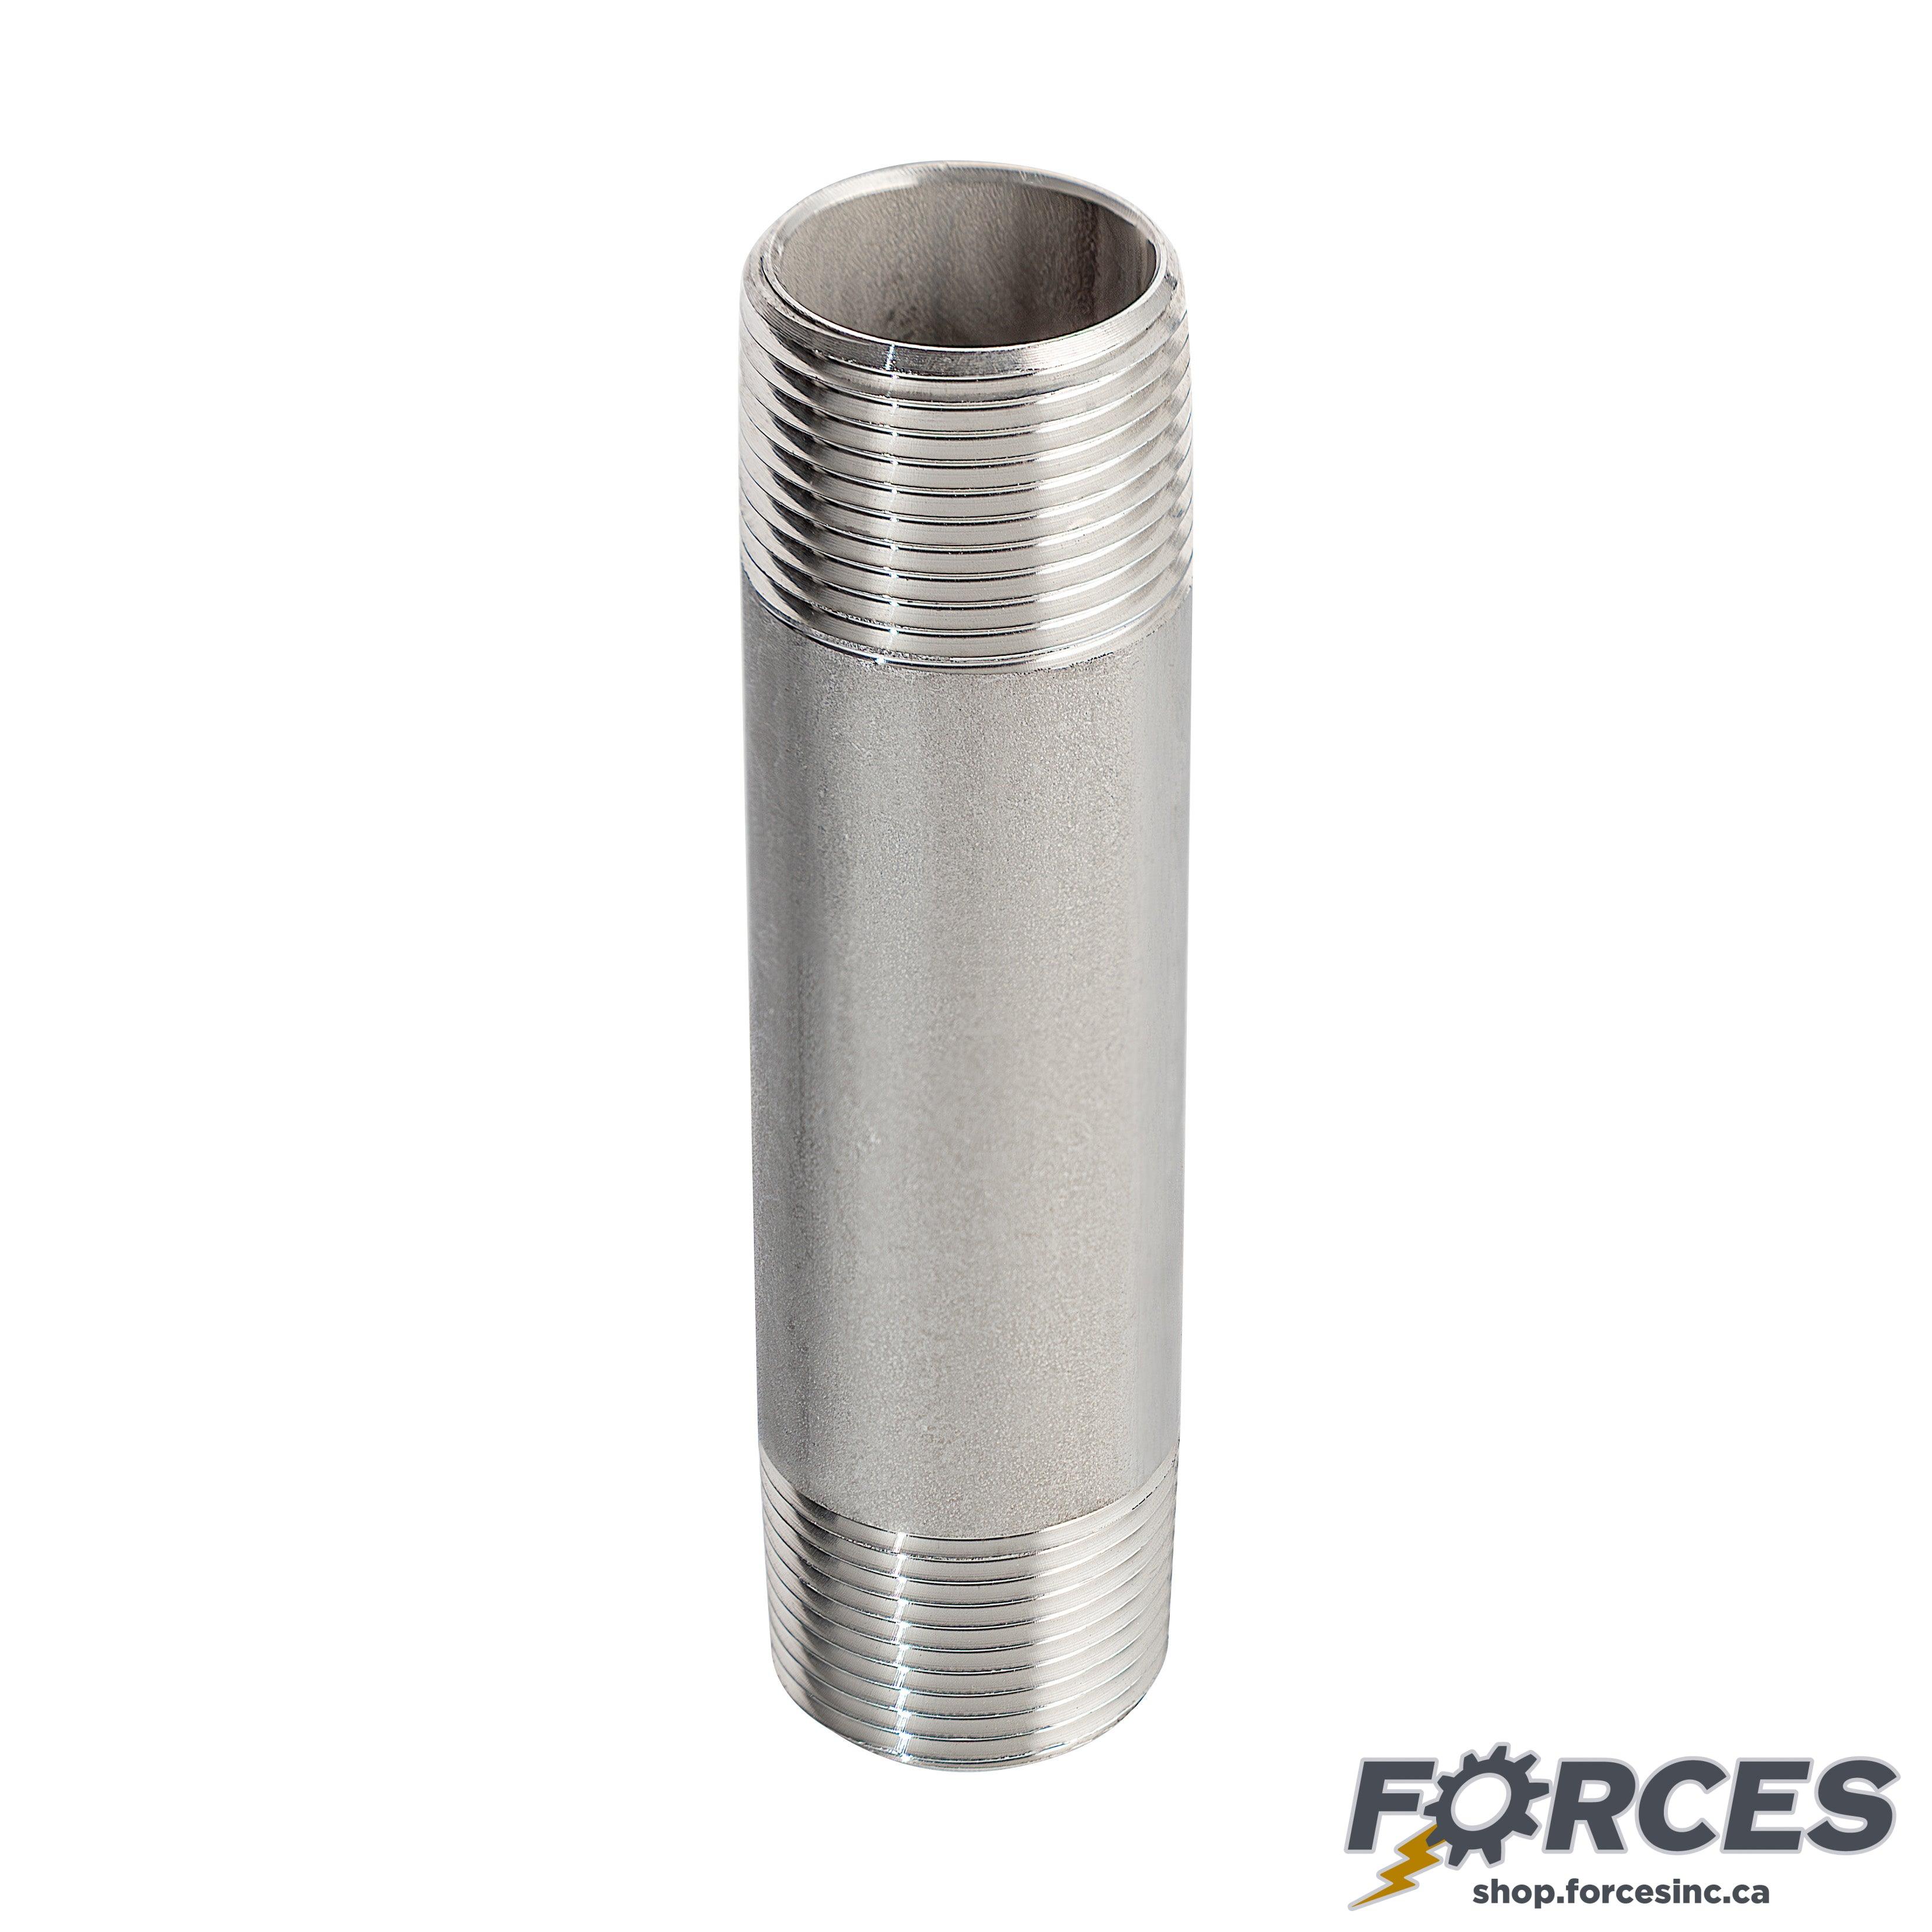 1-1/4" X 6" Long Nipple - Stainless Steel 316 - Forces Inc